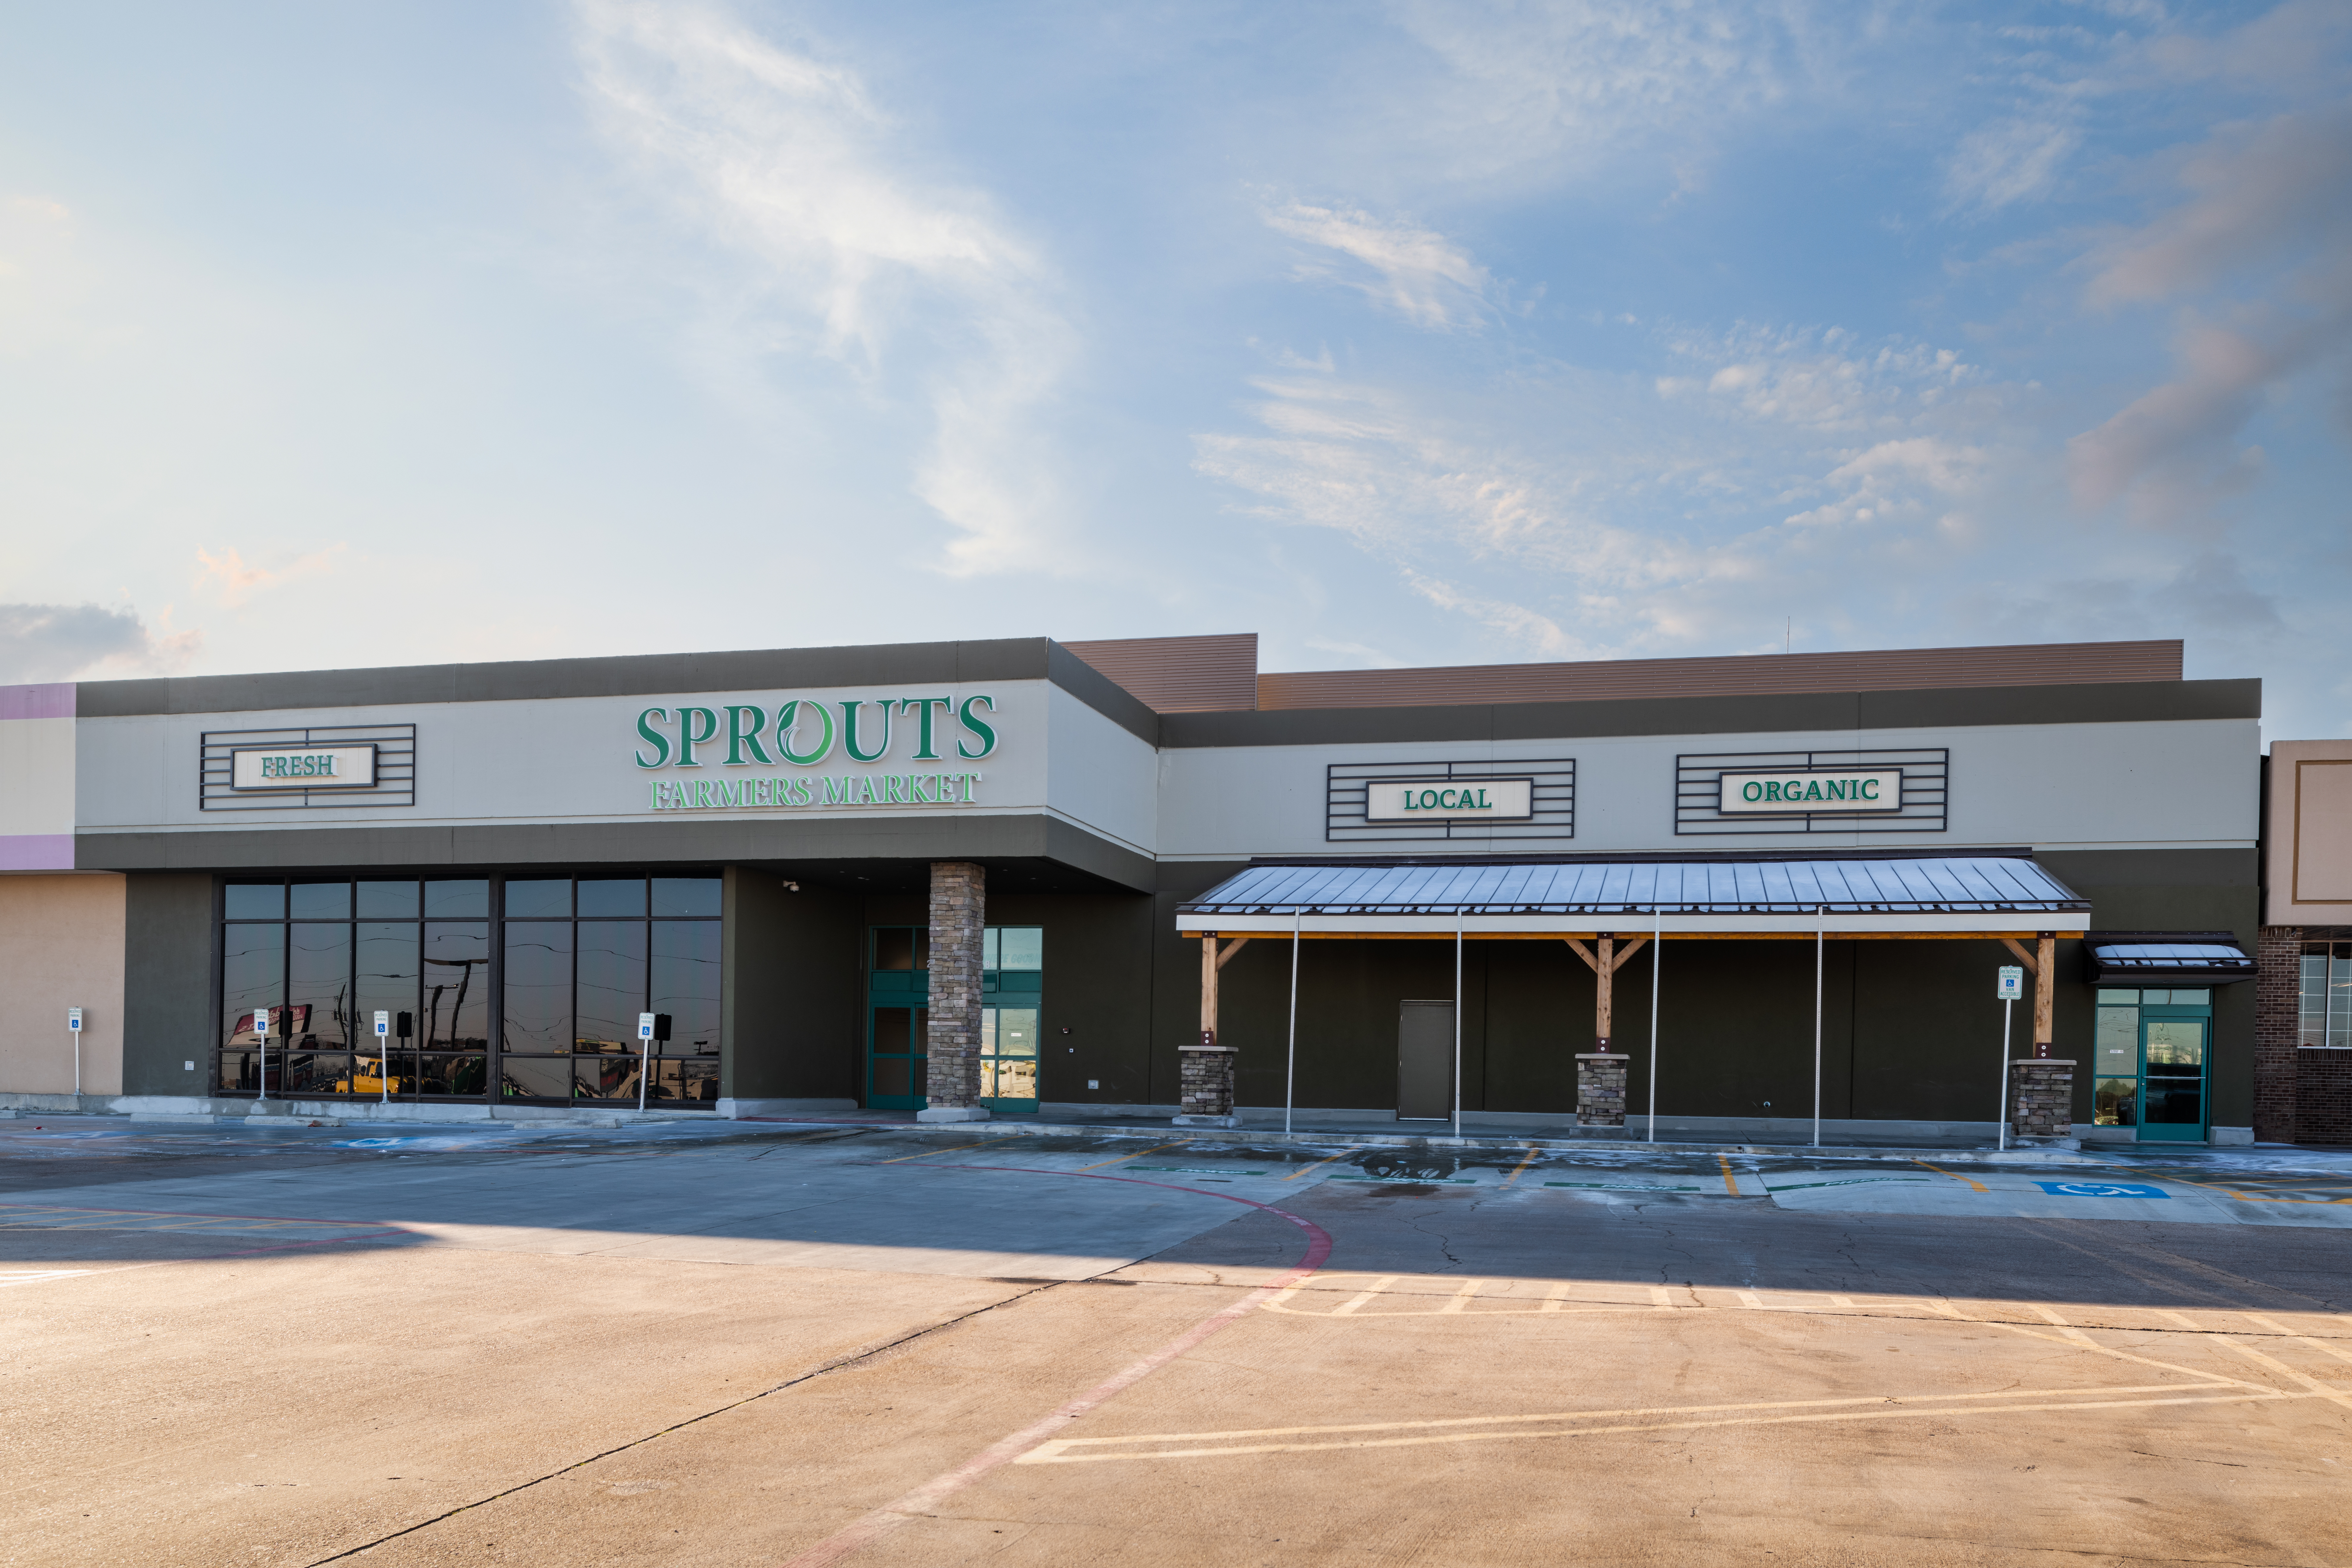 HDJ Commercial Retail Sprouts Grocery Store